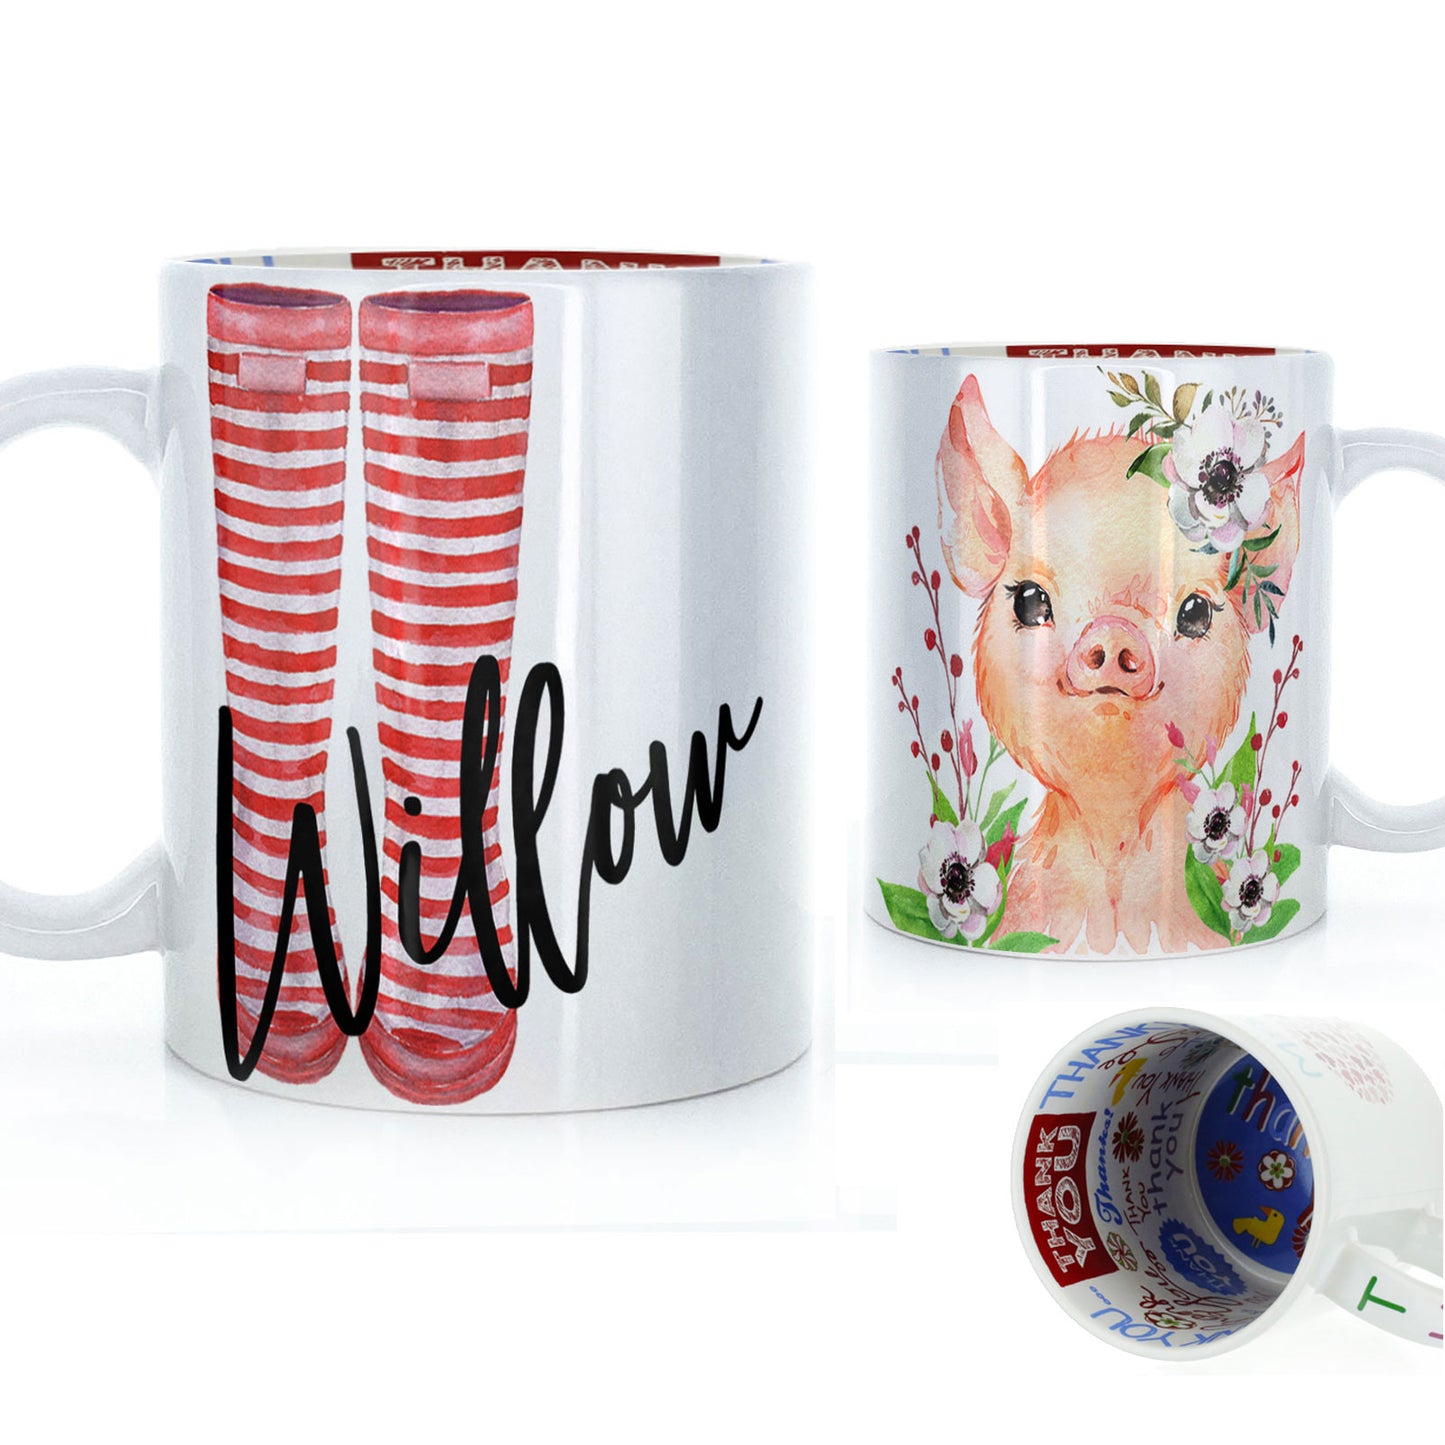 Personalised Mug with Stylish Text and White Flower Pig & Red Striped Wellies